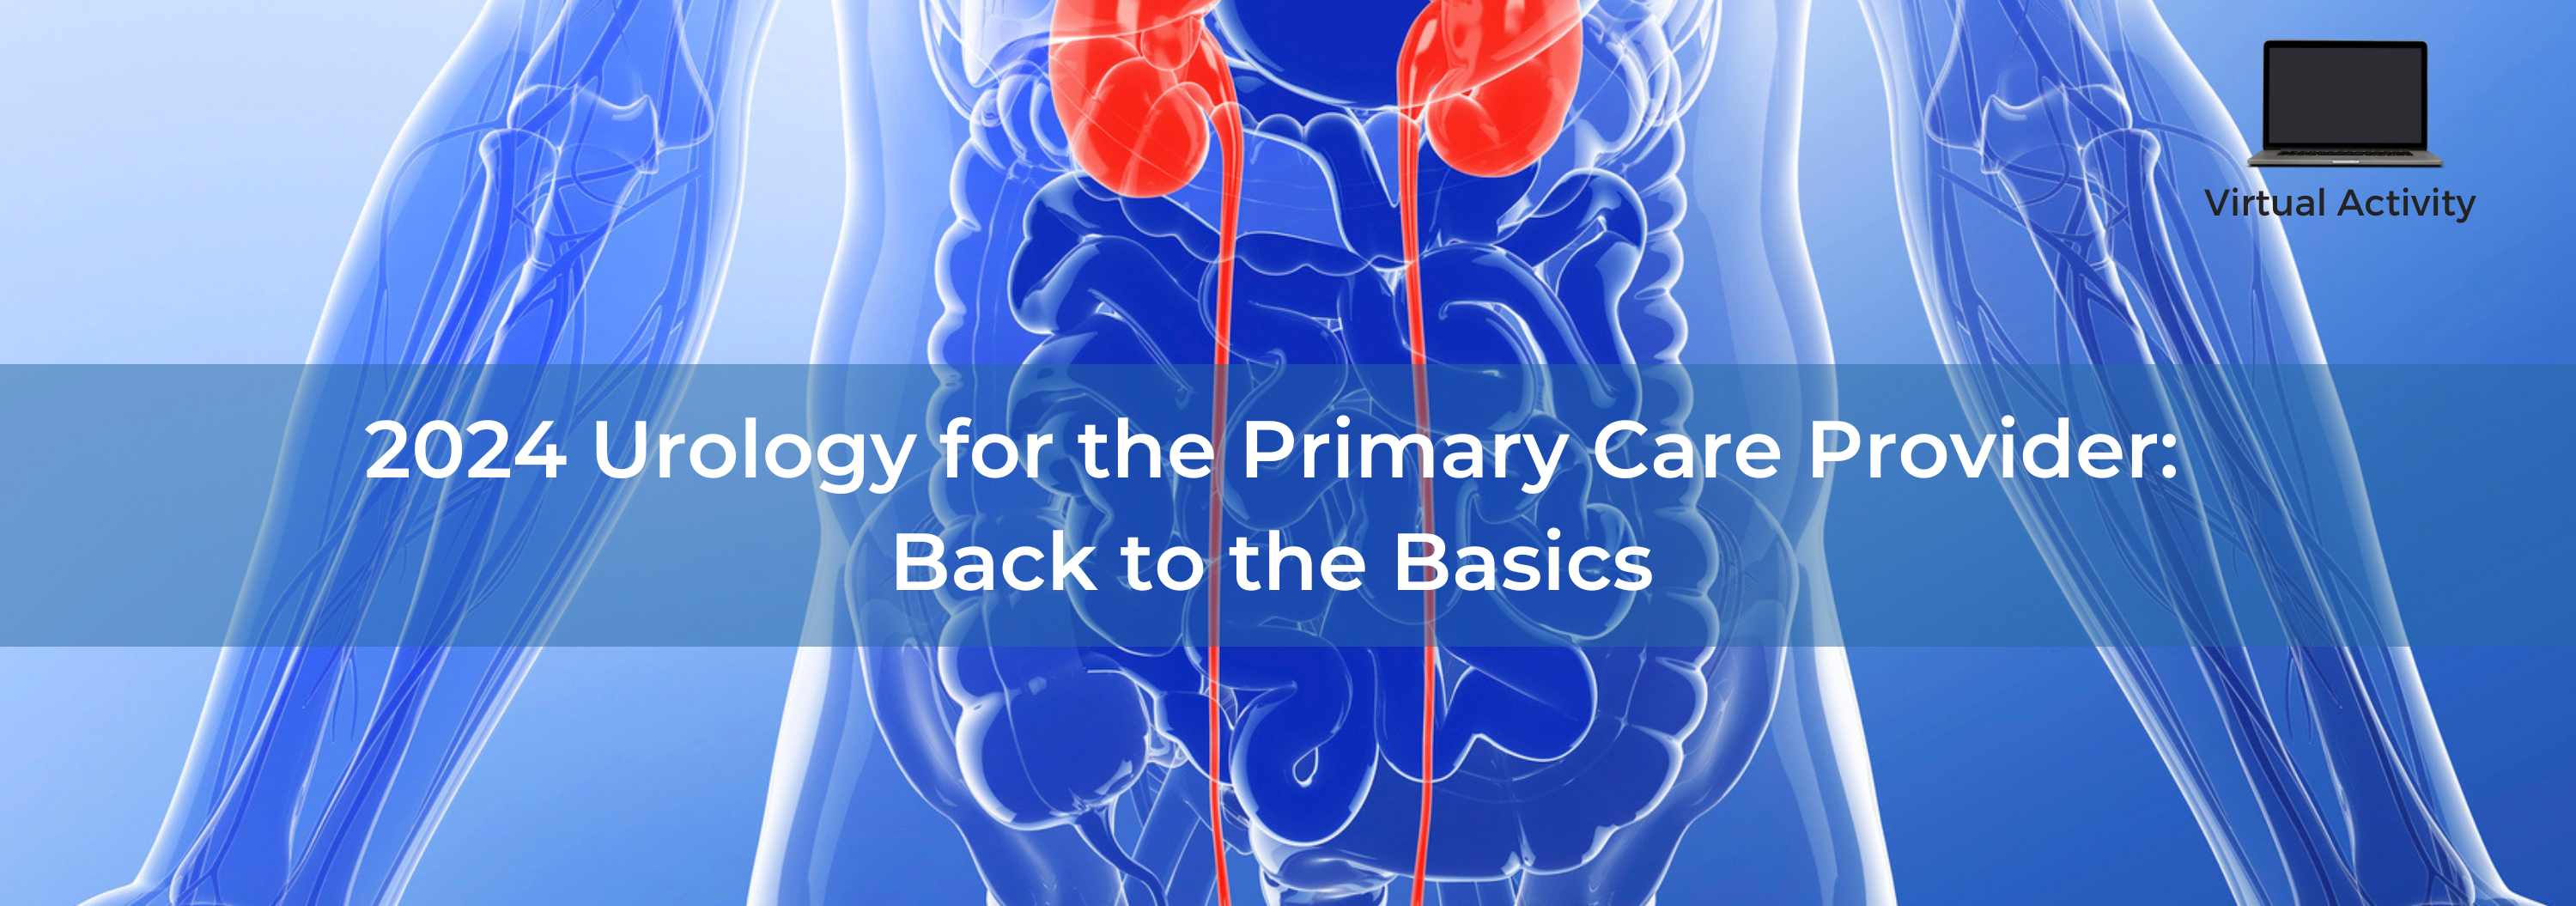 2024 Urology for the Primary Care Provider: Back to the Basics Banner